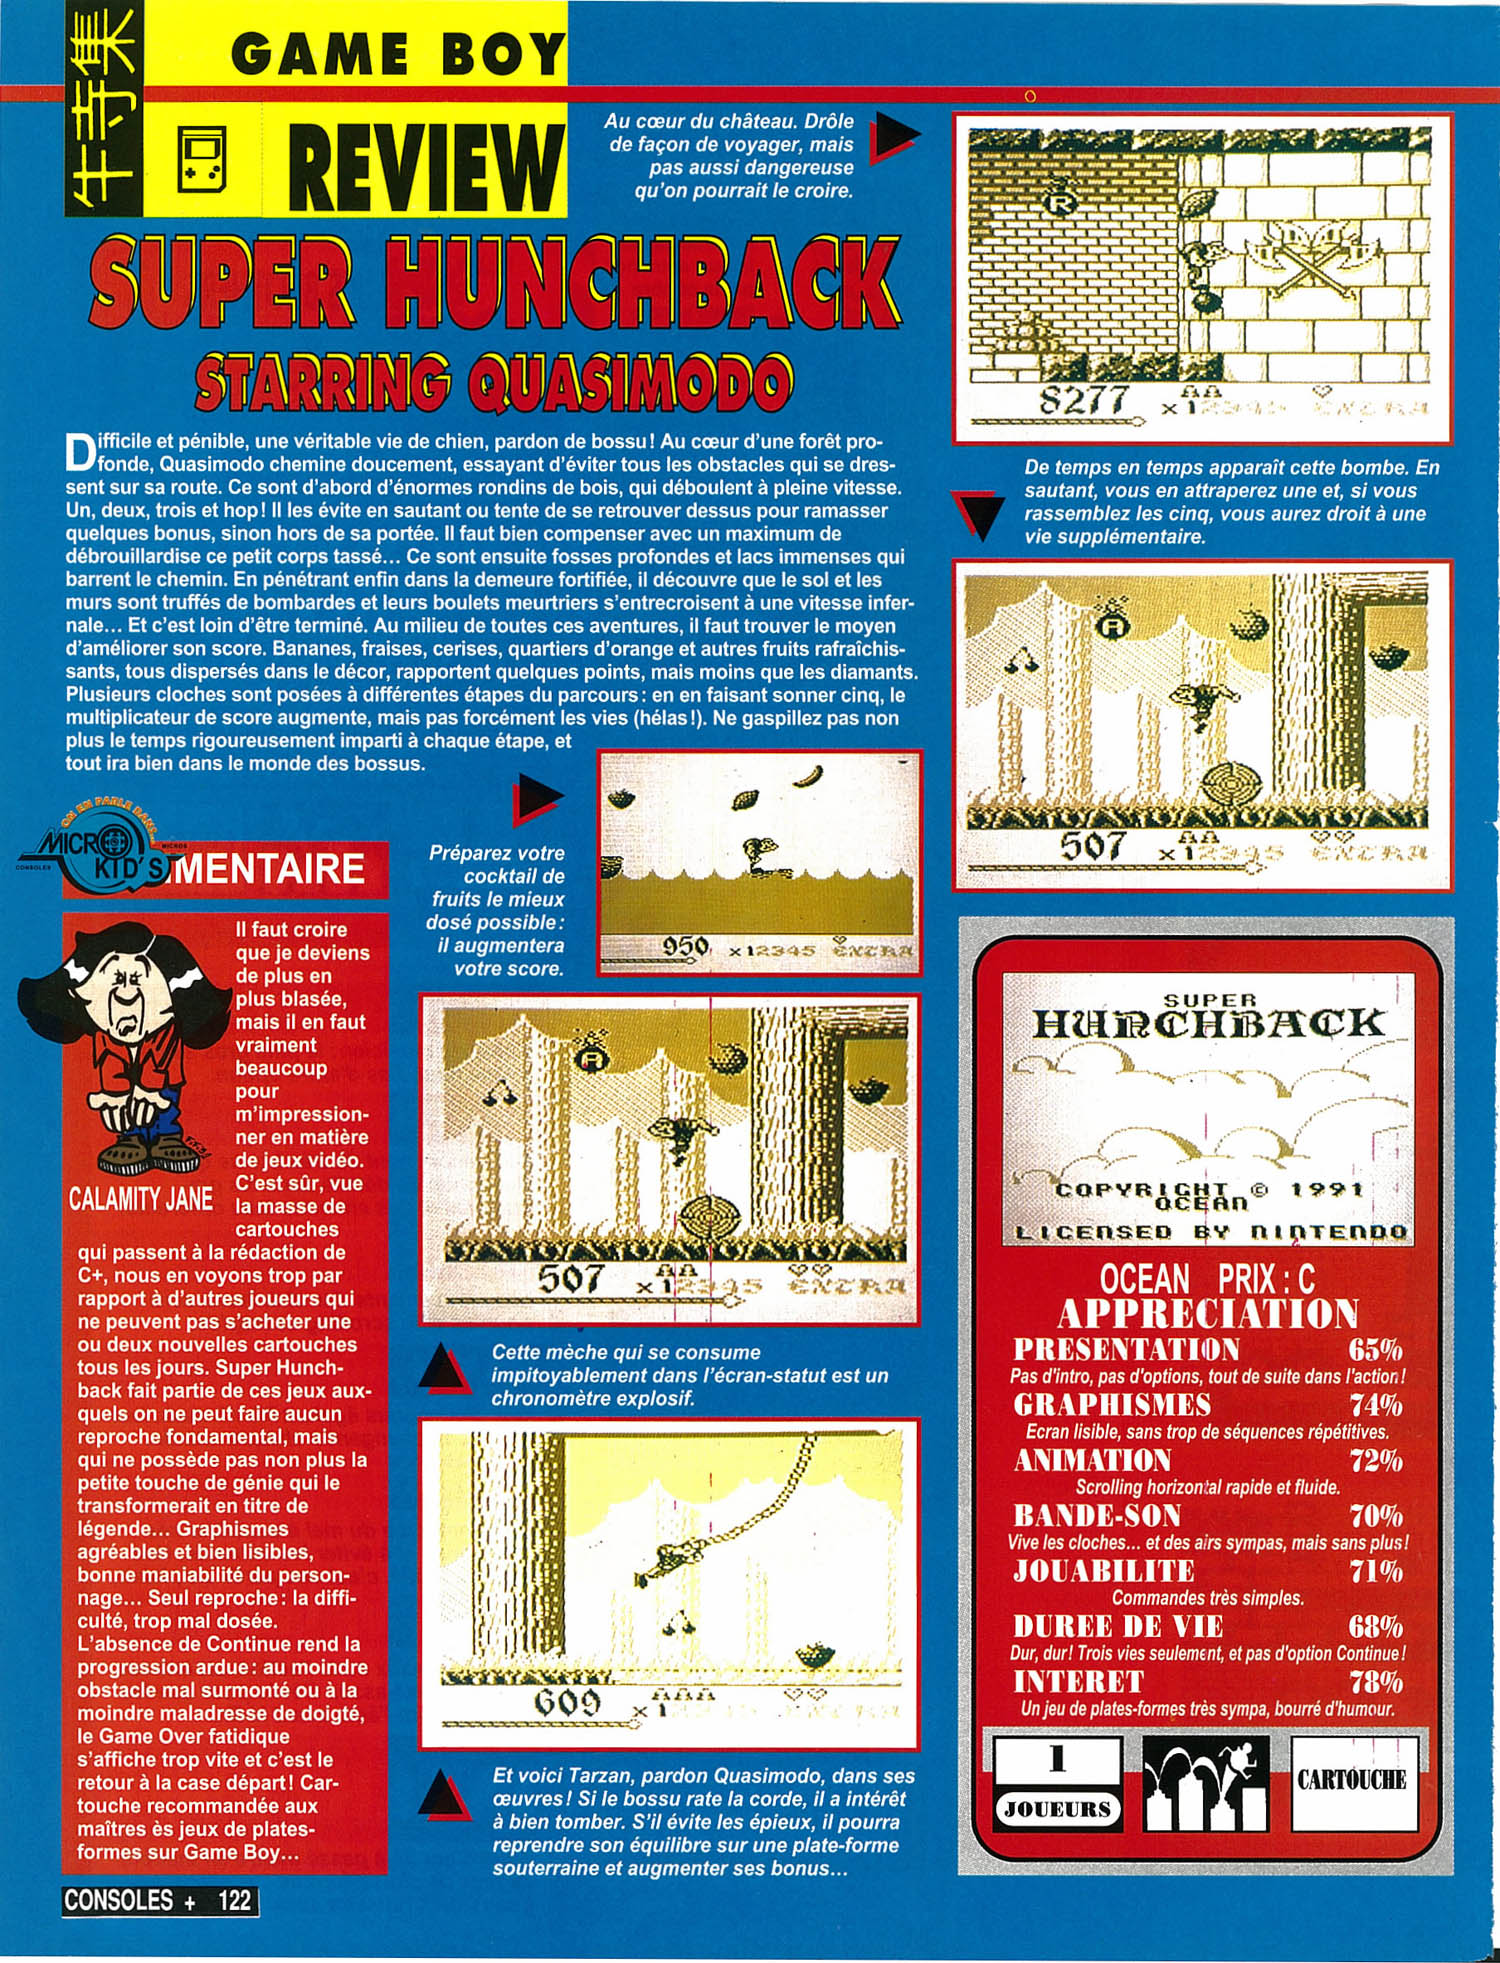 tests//849/Consoles + 019 - Page 122 (avril 1993).jpg